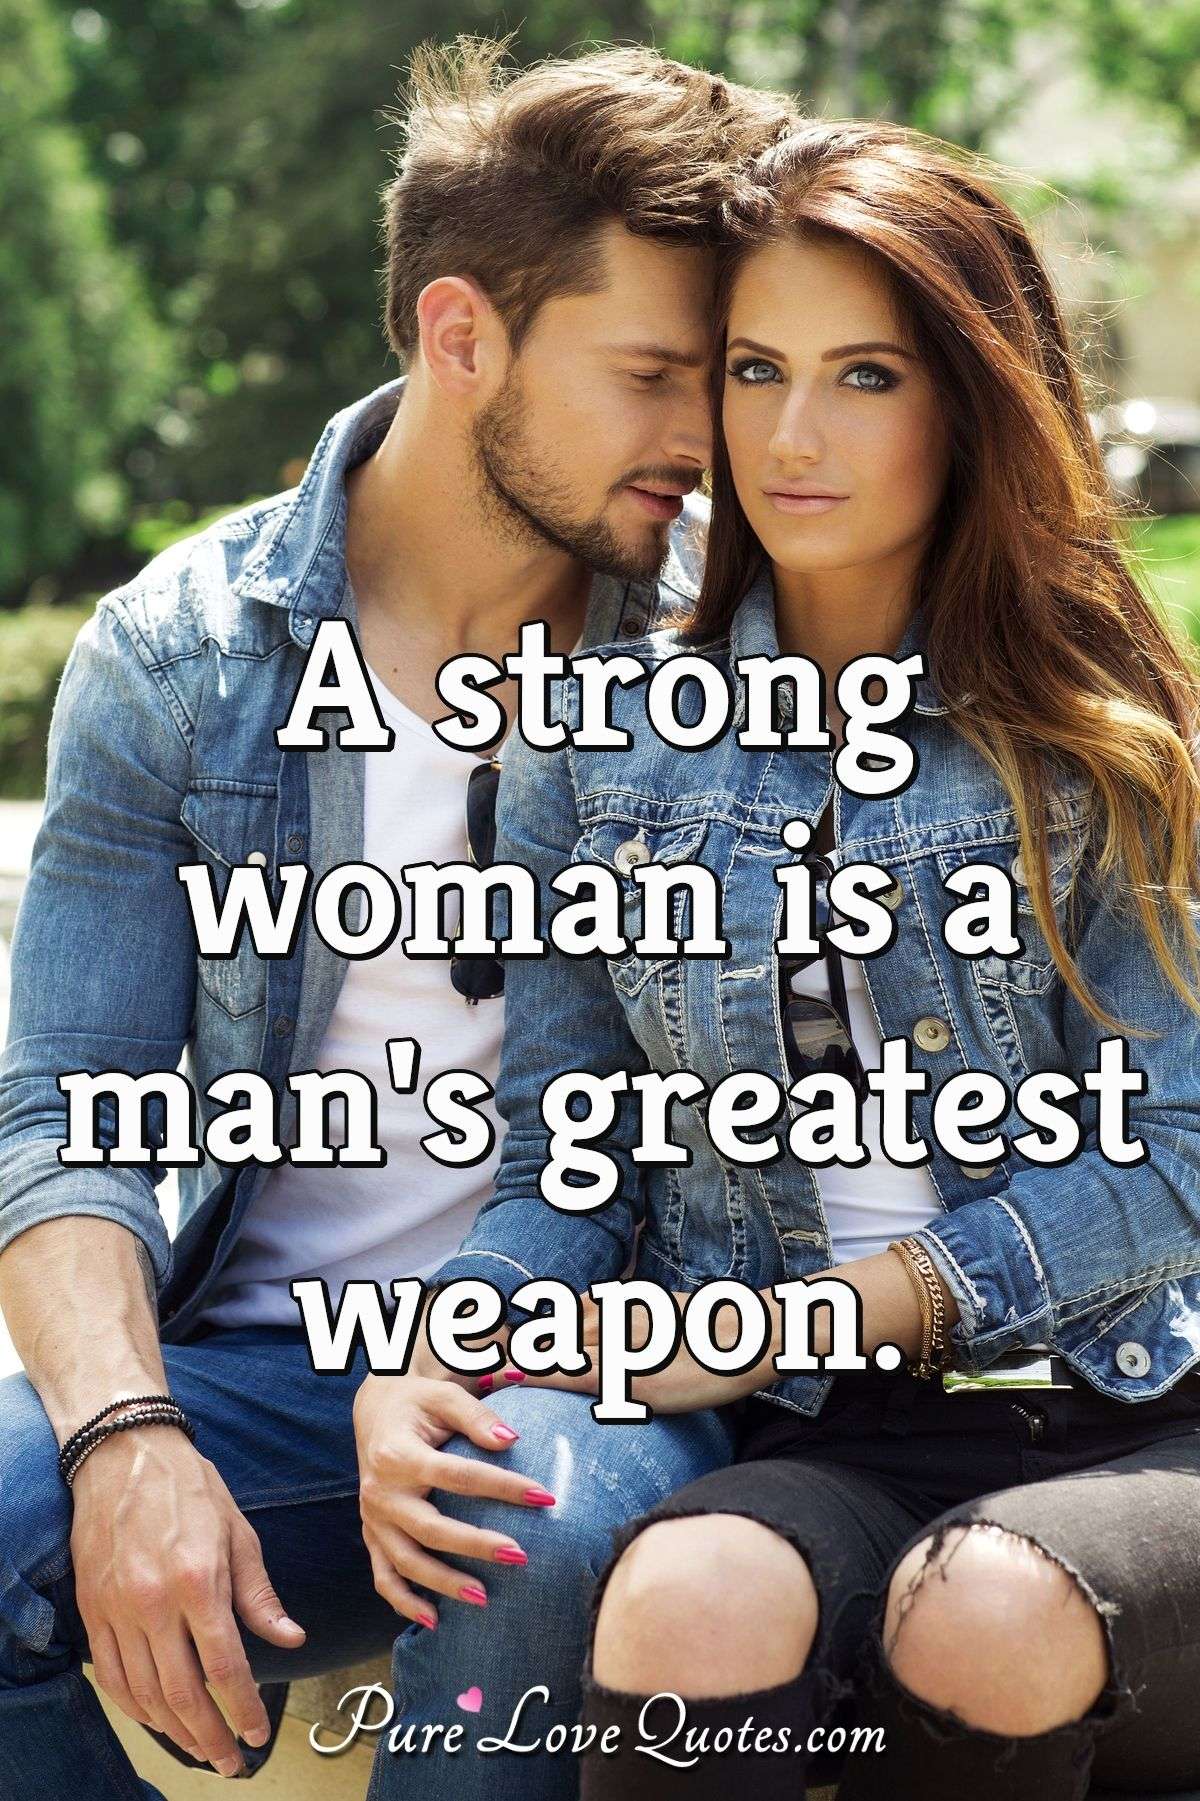 A strong woman is a man's greatest weapon. - Anonymous